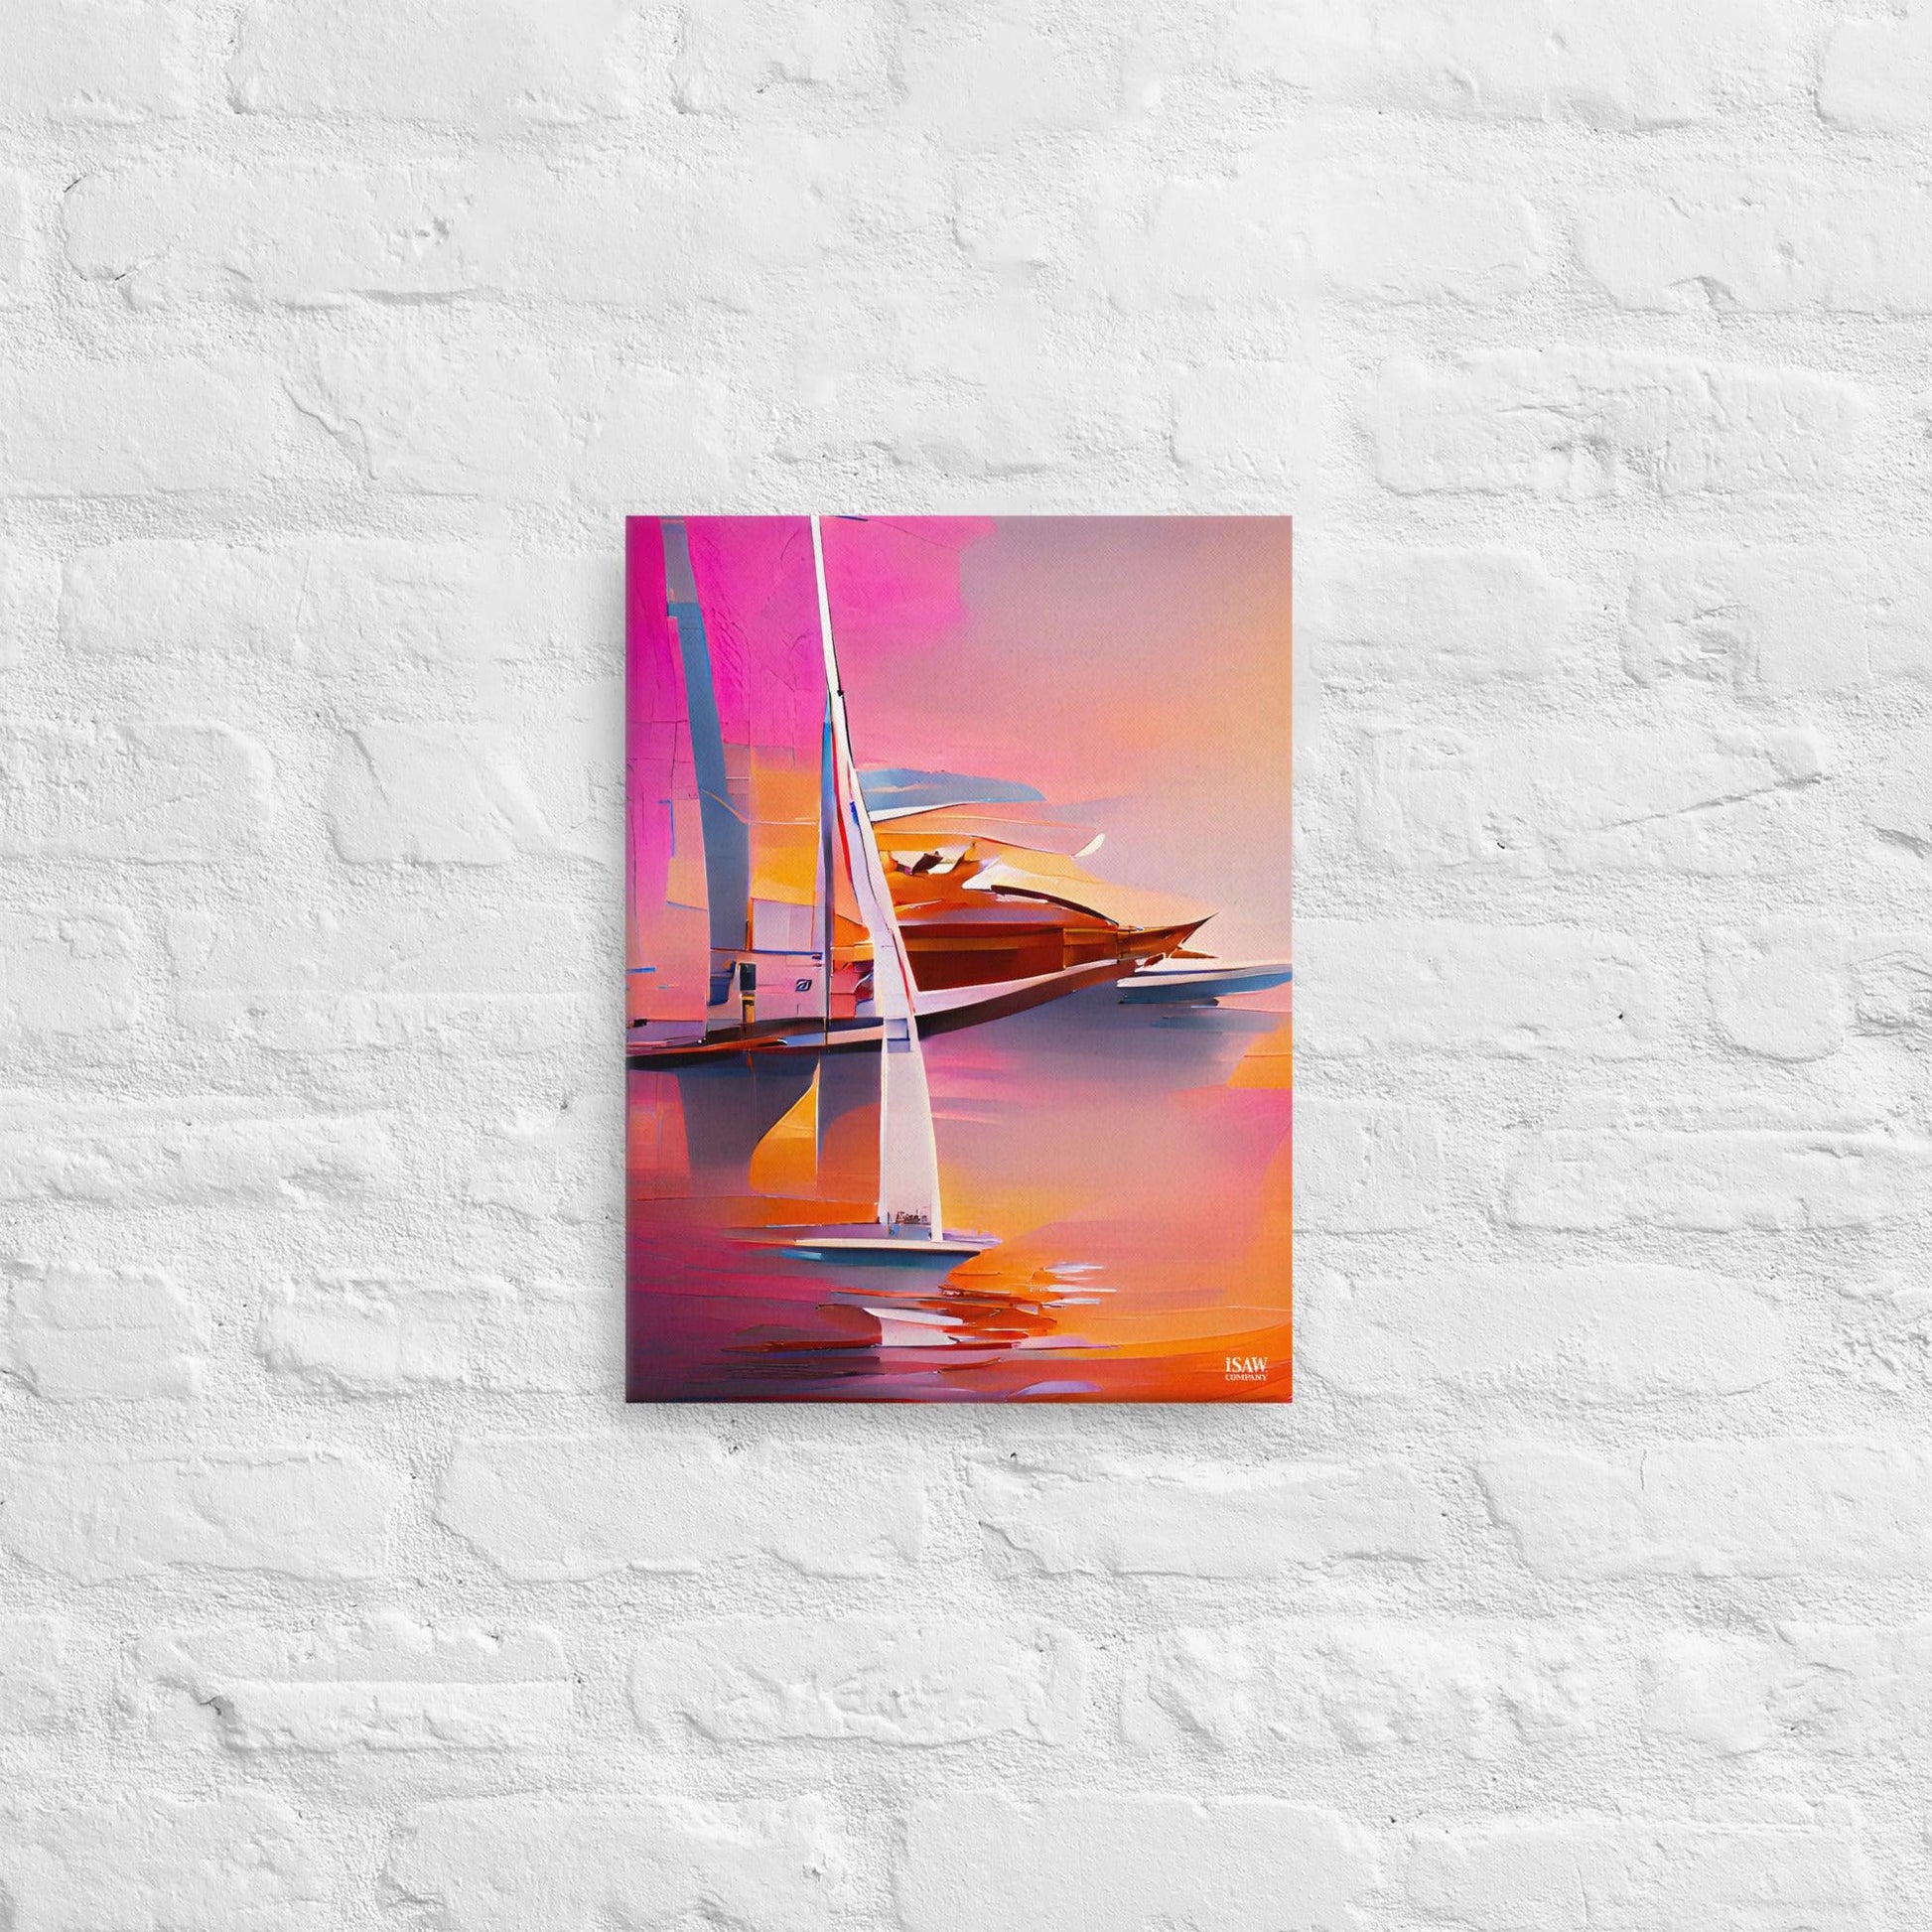 Seaclusion - Canvas Print - iSAW Company